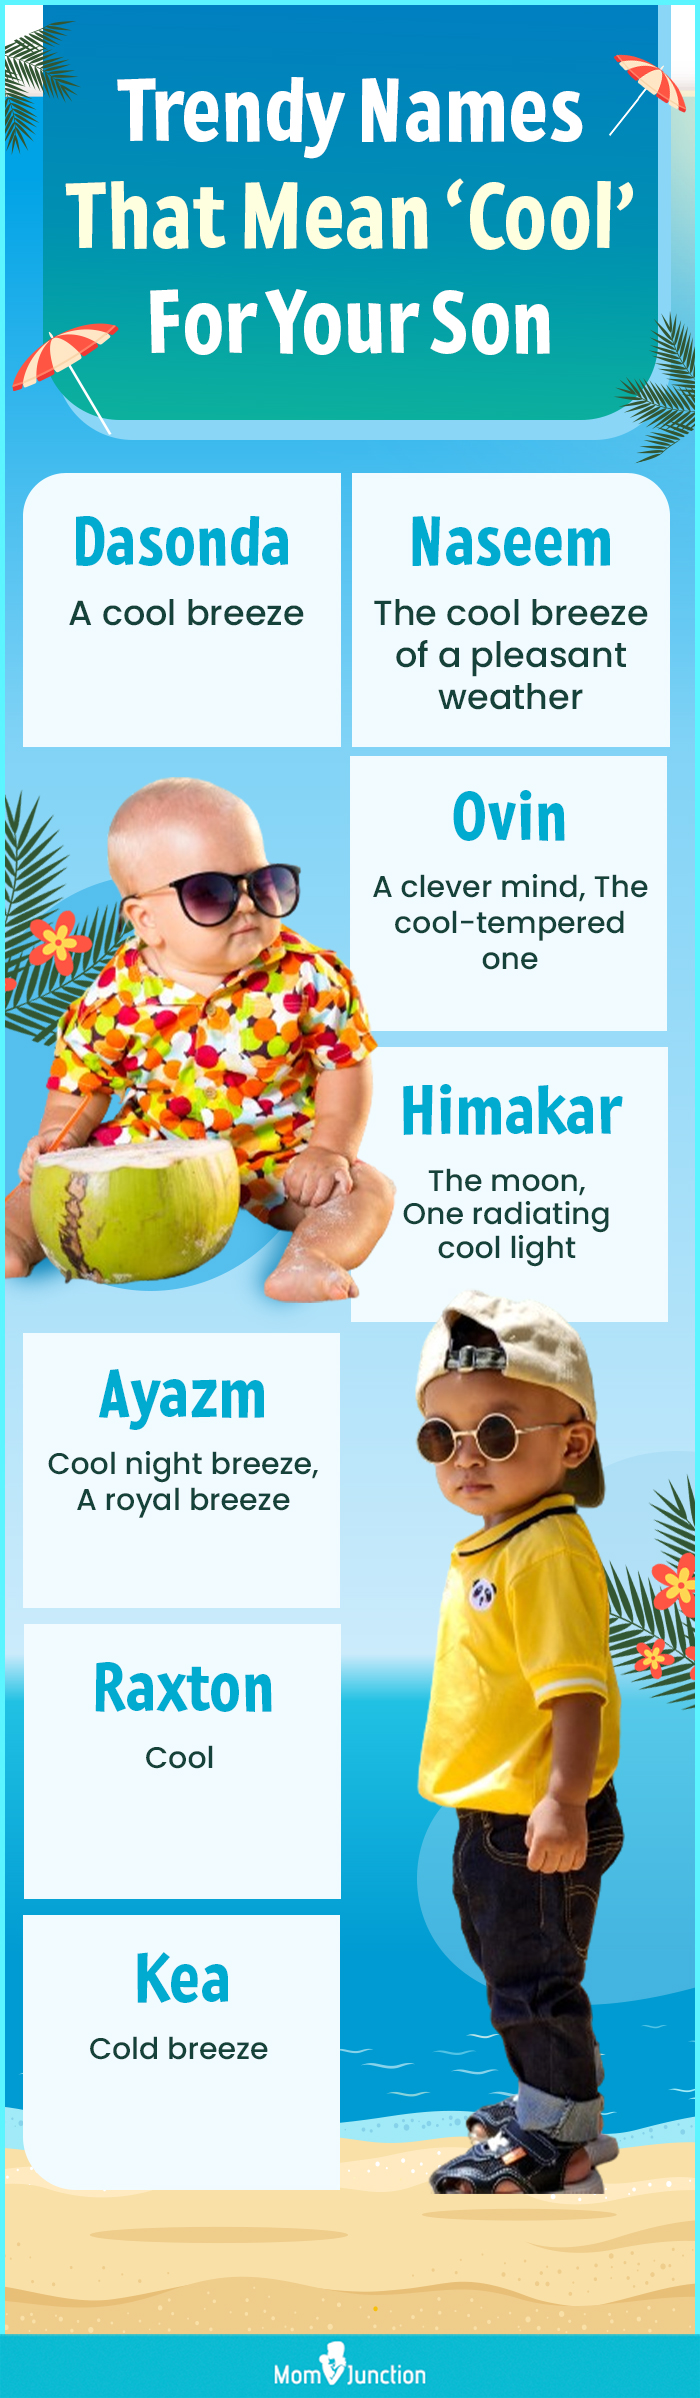 Trendy Names That Mean Cool For Your Son (infographic)